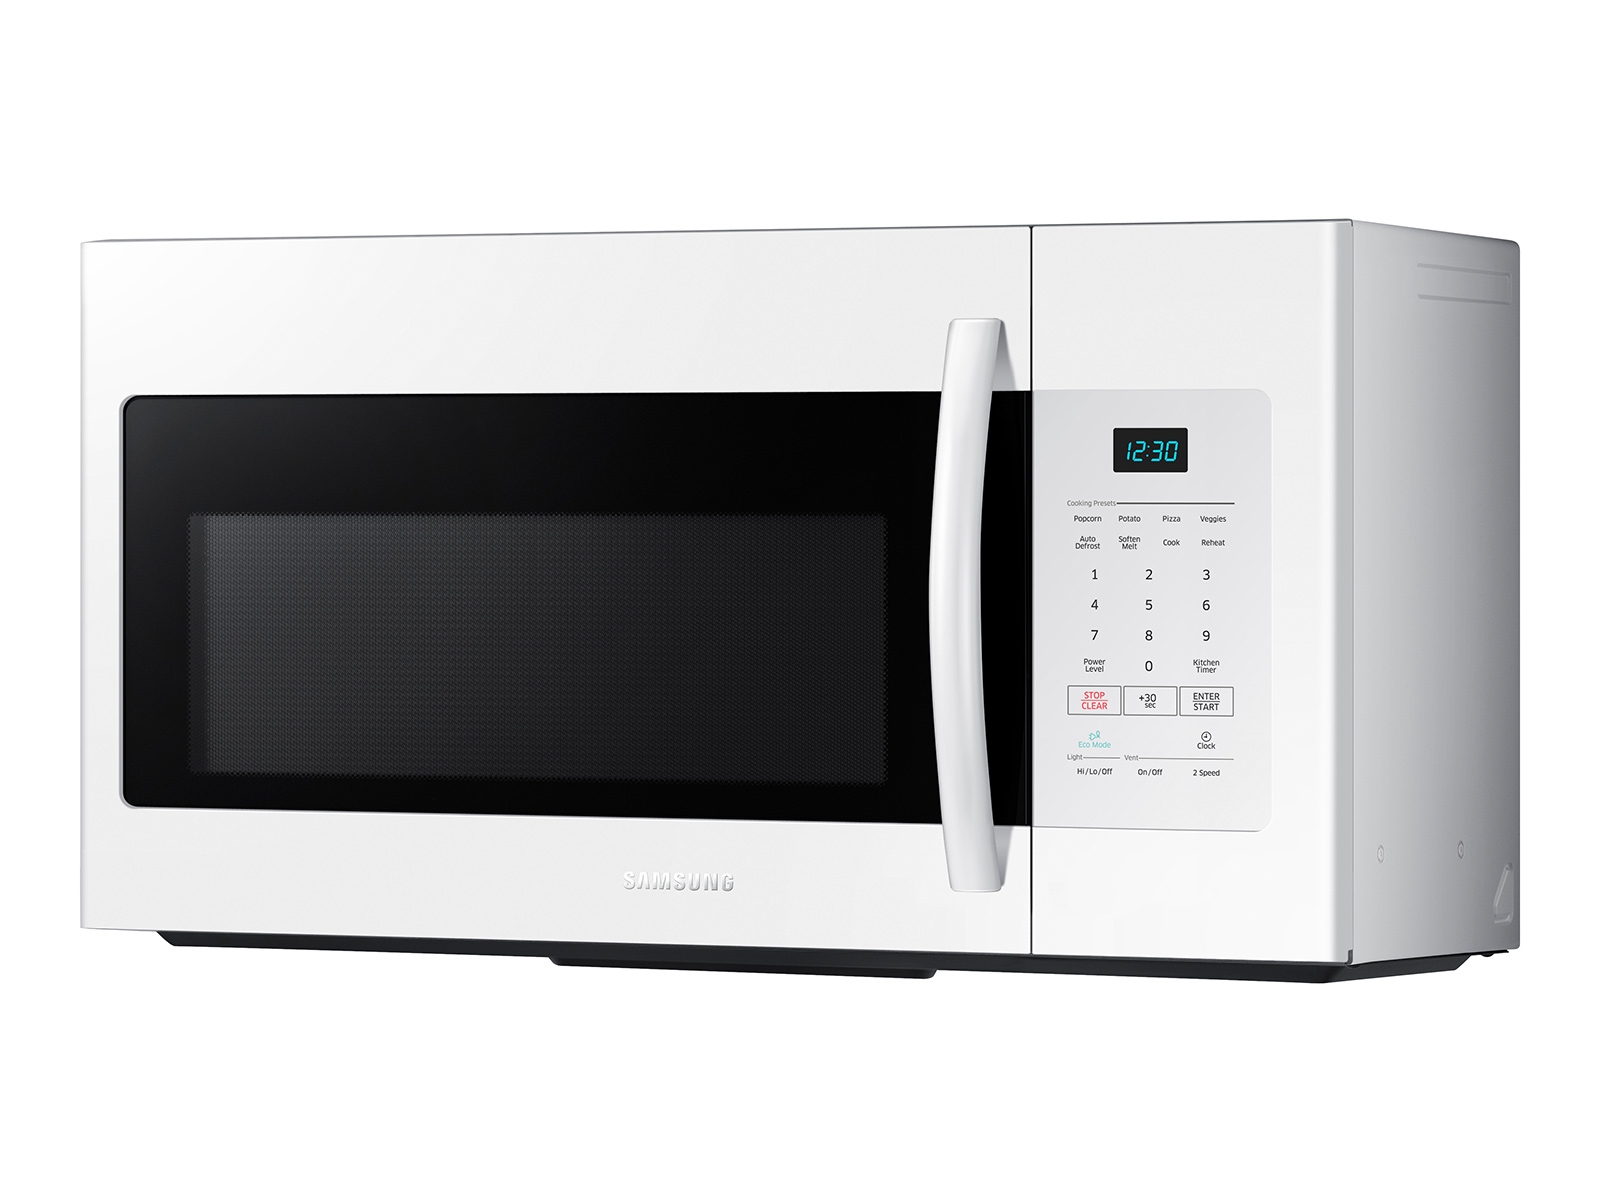 https://image-us.samsung.com/SamsungUS/home/home-appliances/microwaves/over-the-range/pdp/me16h702sew/gallery/11_Microwave_OTR_ME16H702SEW_R-Perspective_White.jpg?$product-details-jpg$